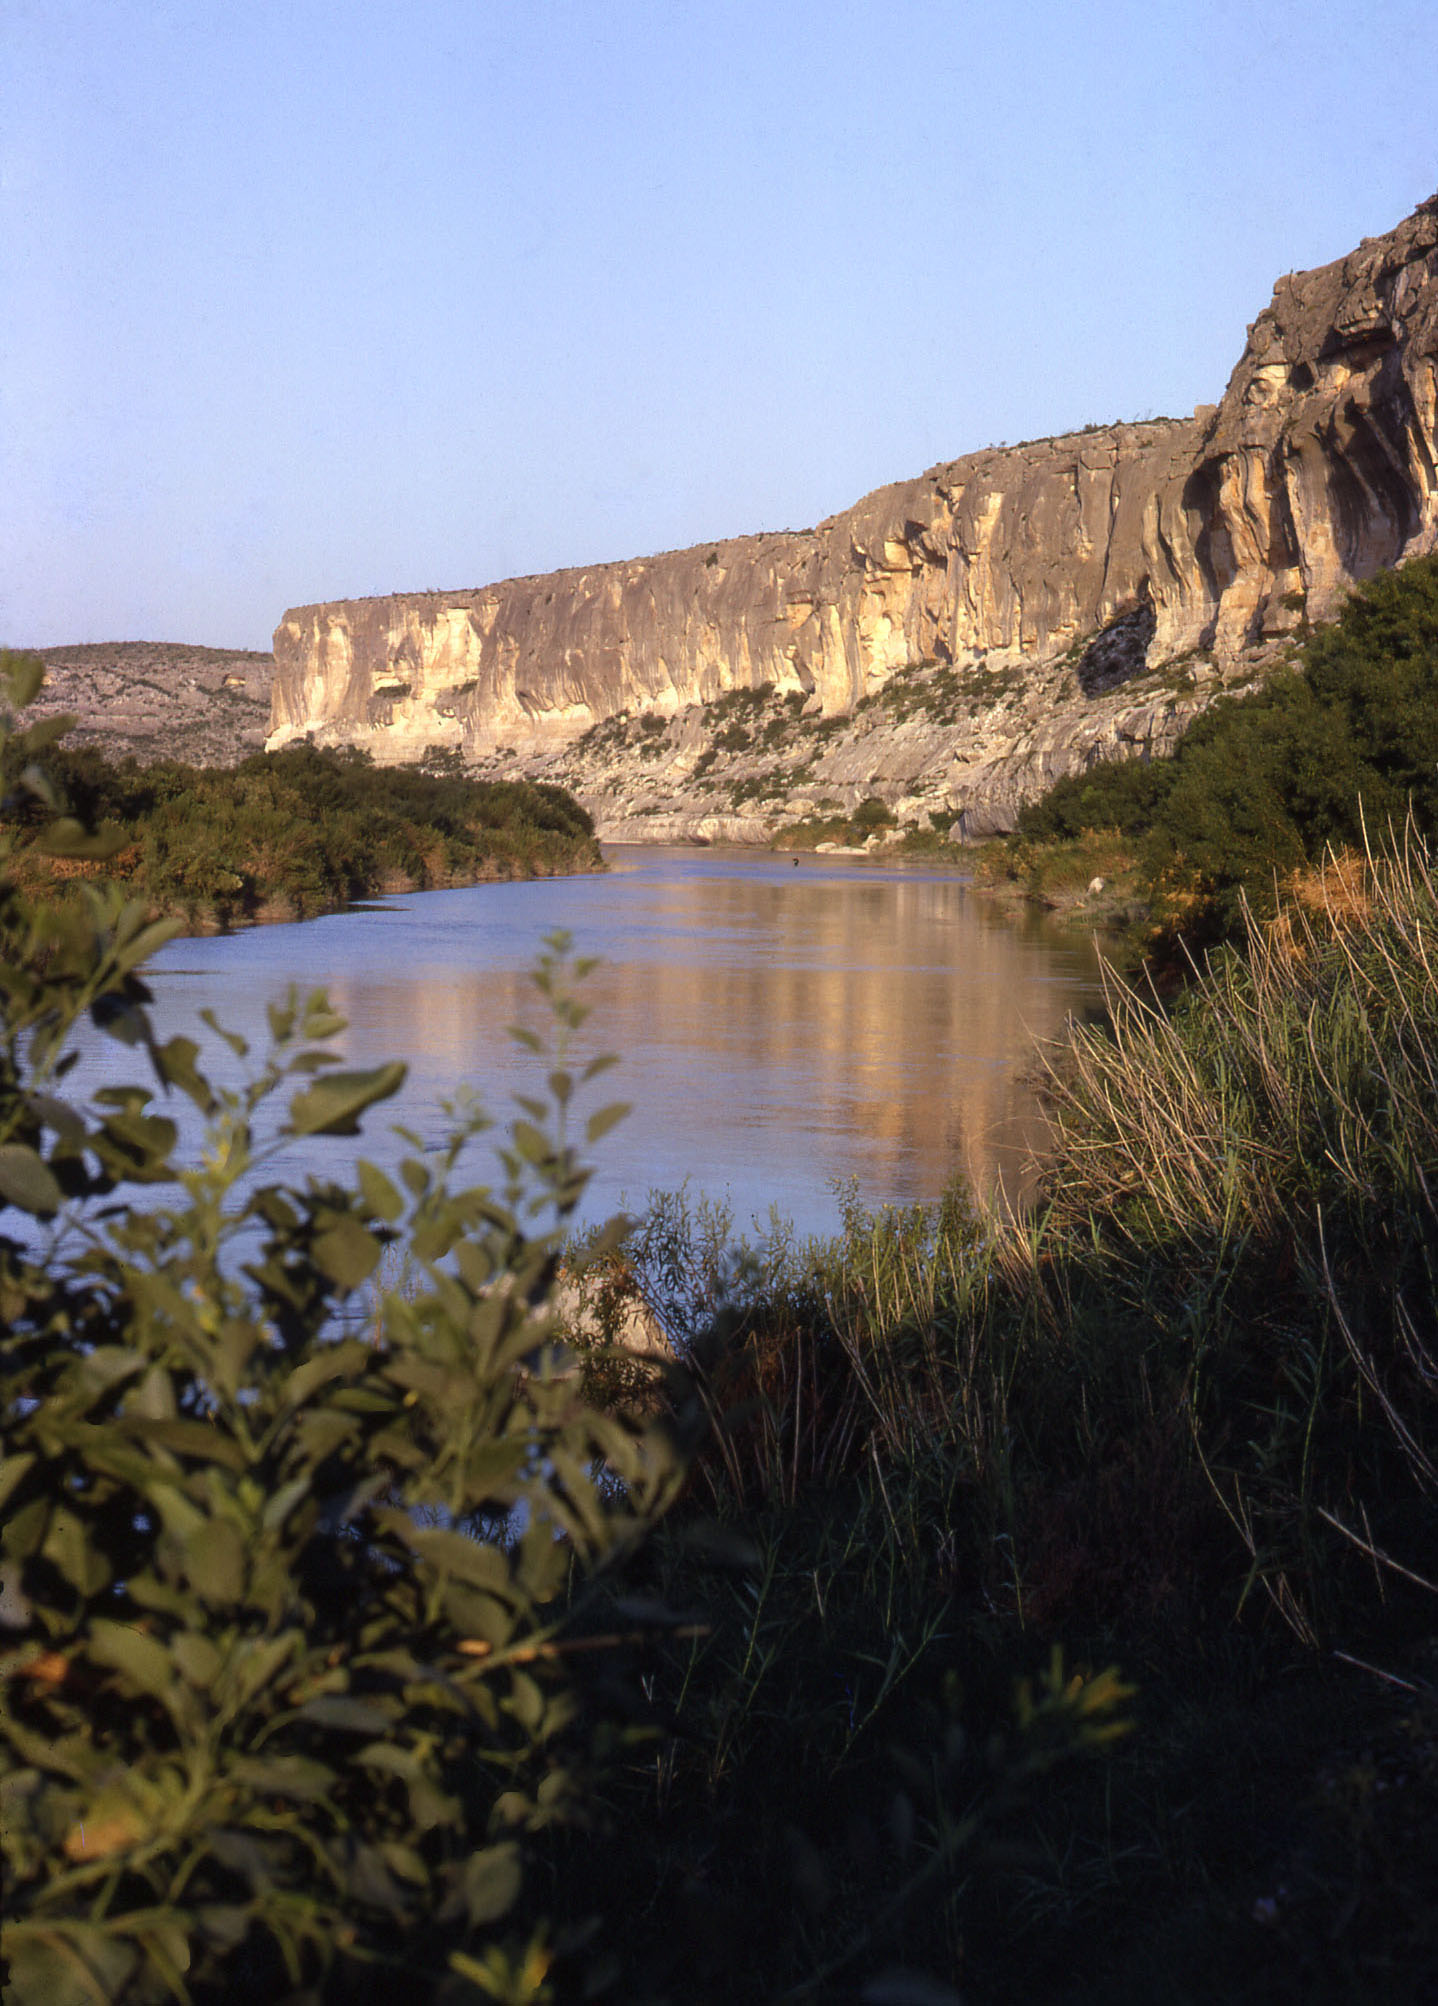 Pecos River canyon, just upstream from Arenosa